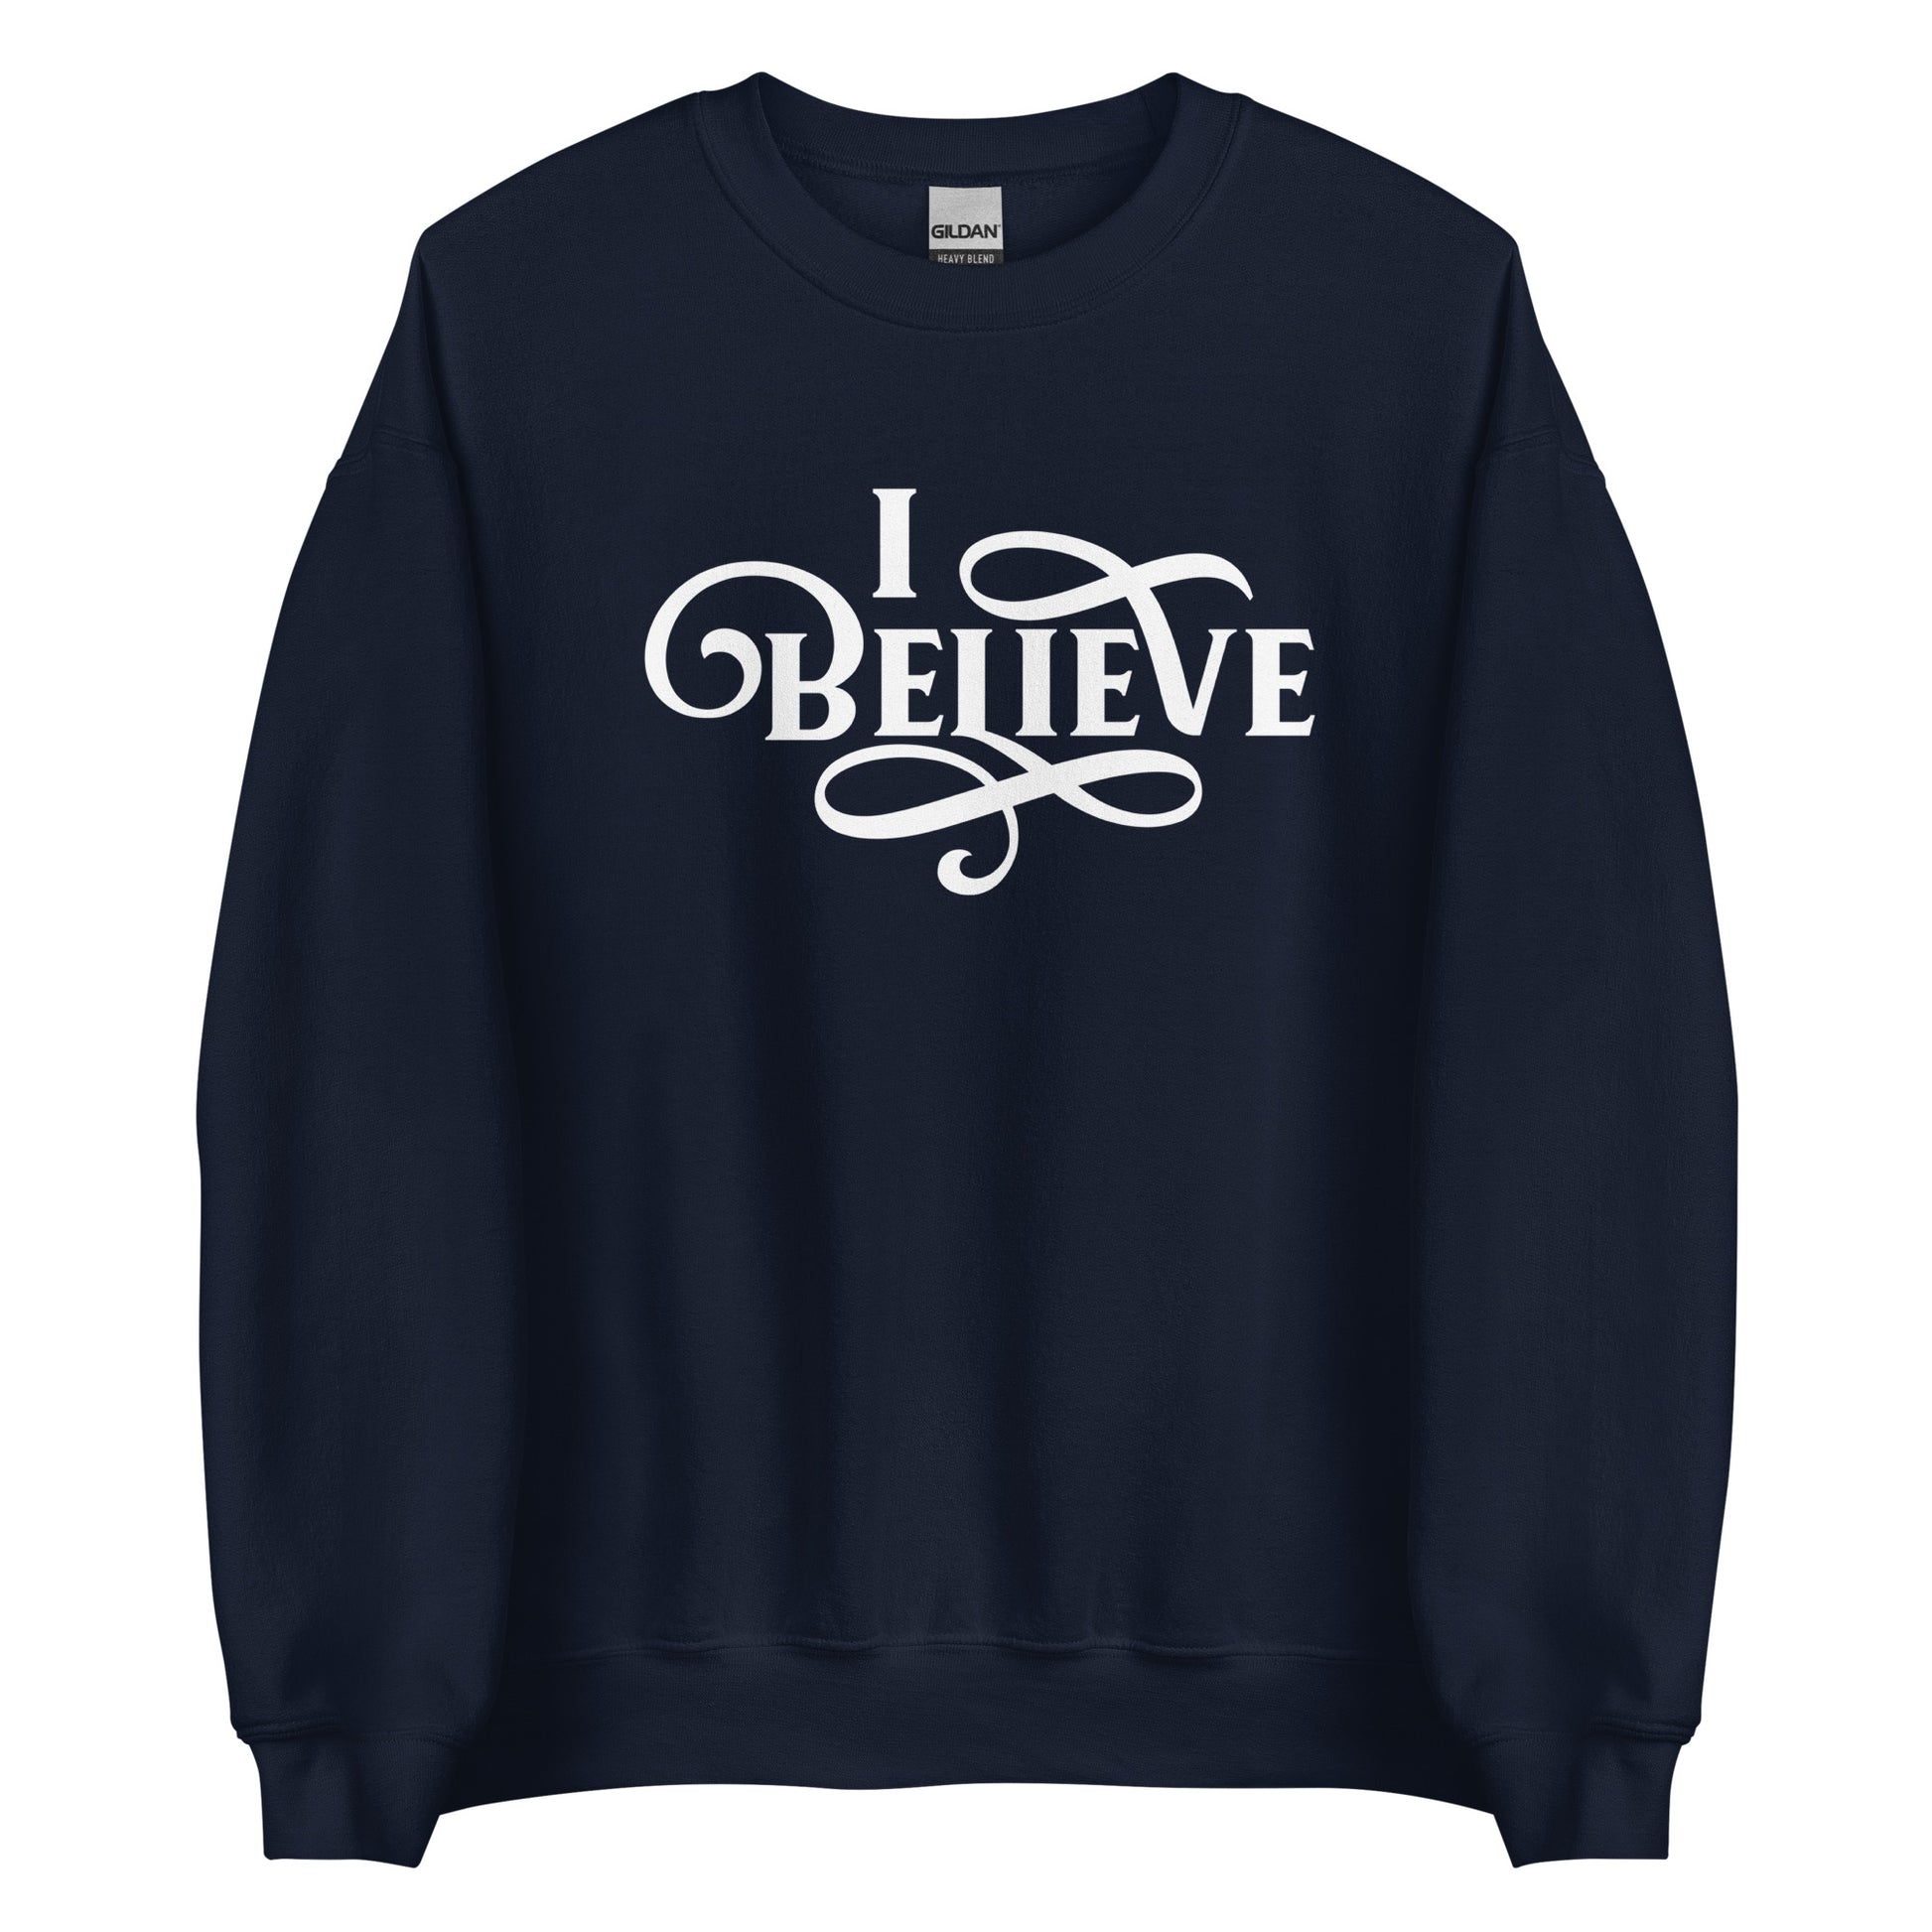 I Believe Swirl Christian aesthetic Jesus believer design printed in white on soft navy blue unisex crewneck sweatshirt for women, great gift for her